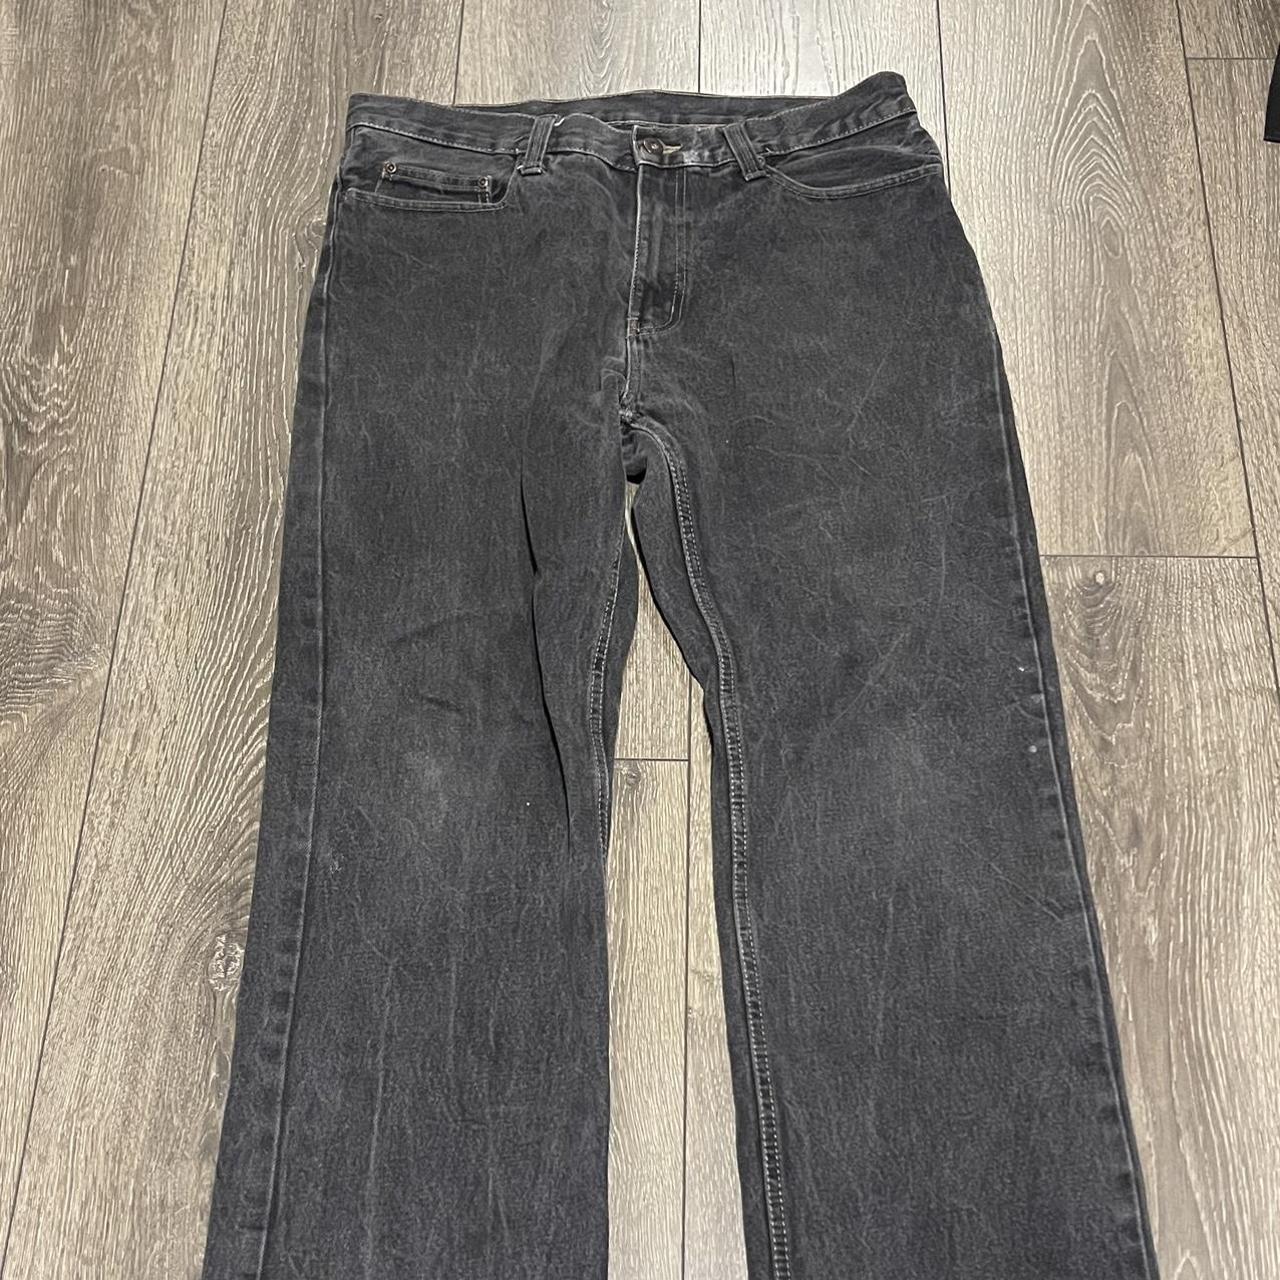 Black Faded Glory Baggy Jeans 34 x 32 Let Me Know... - Depop